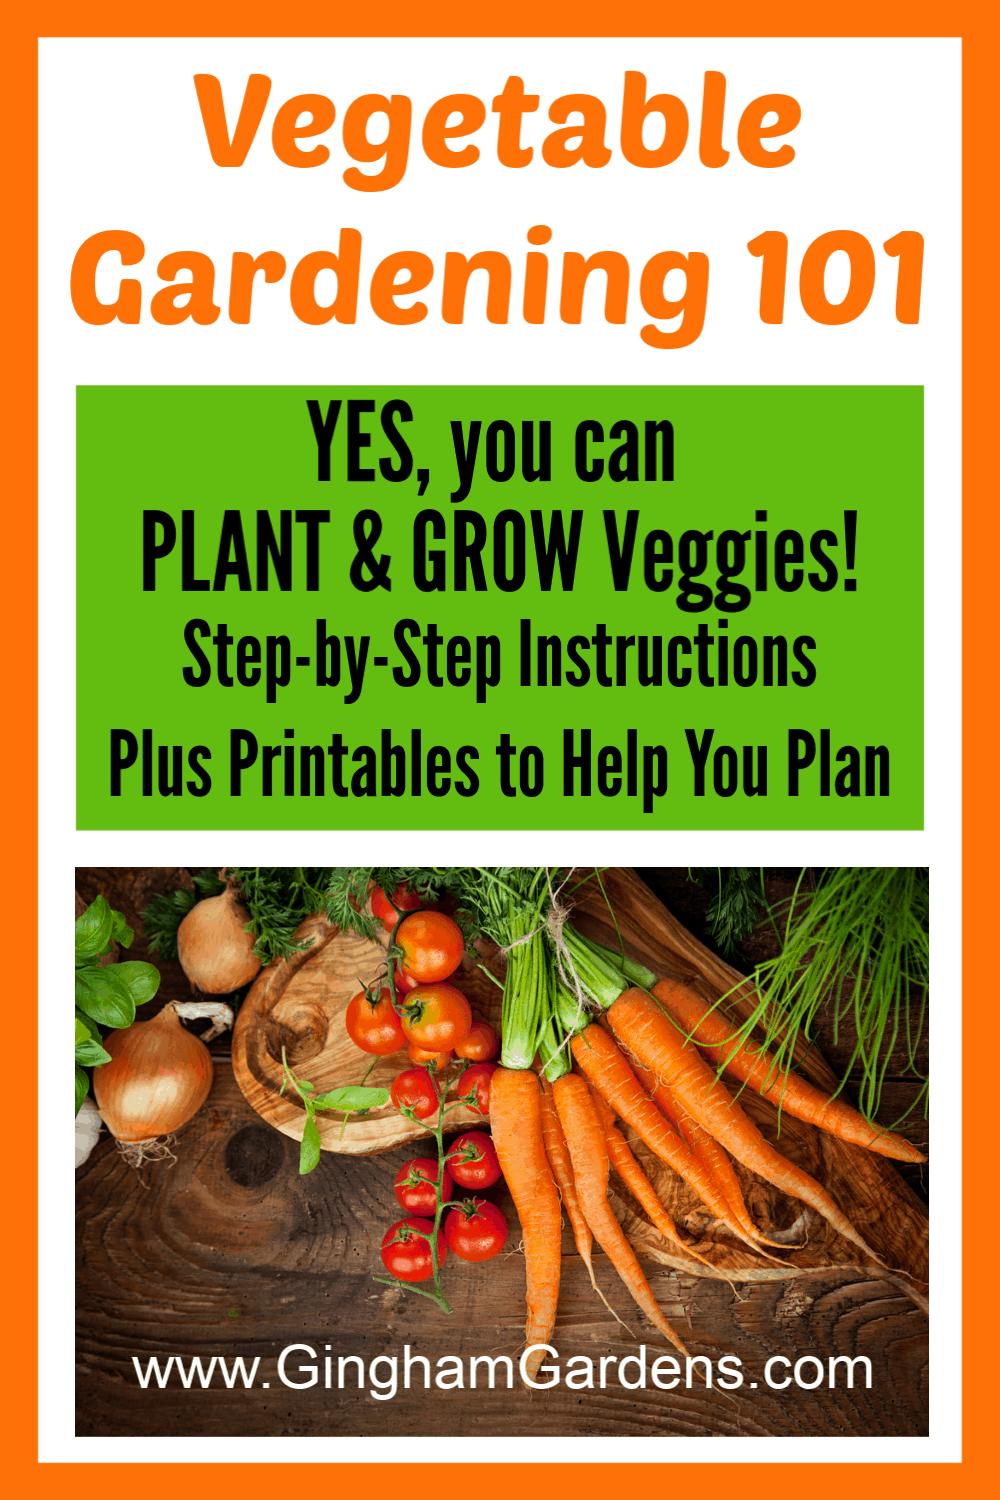 Image of Vegetables with Text Overlay - Vegetable Gardening 101